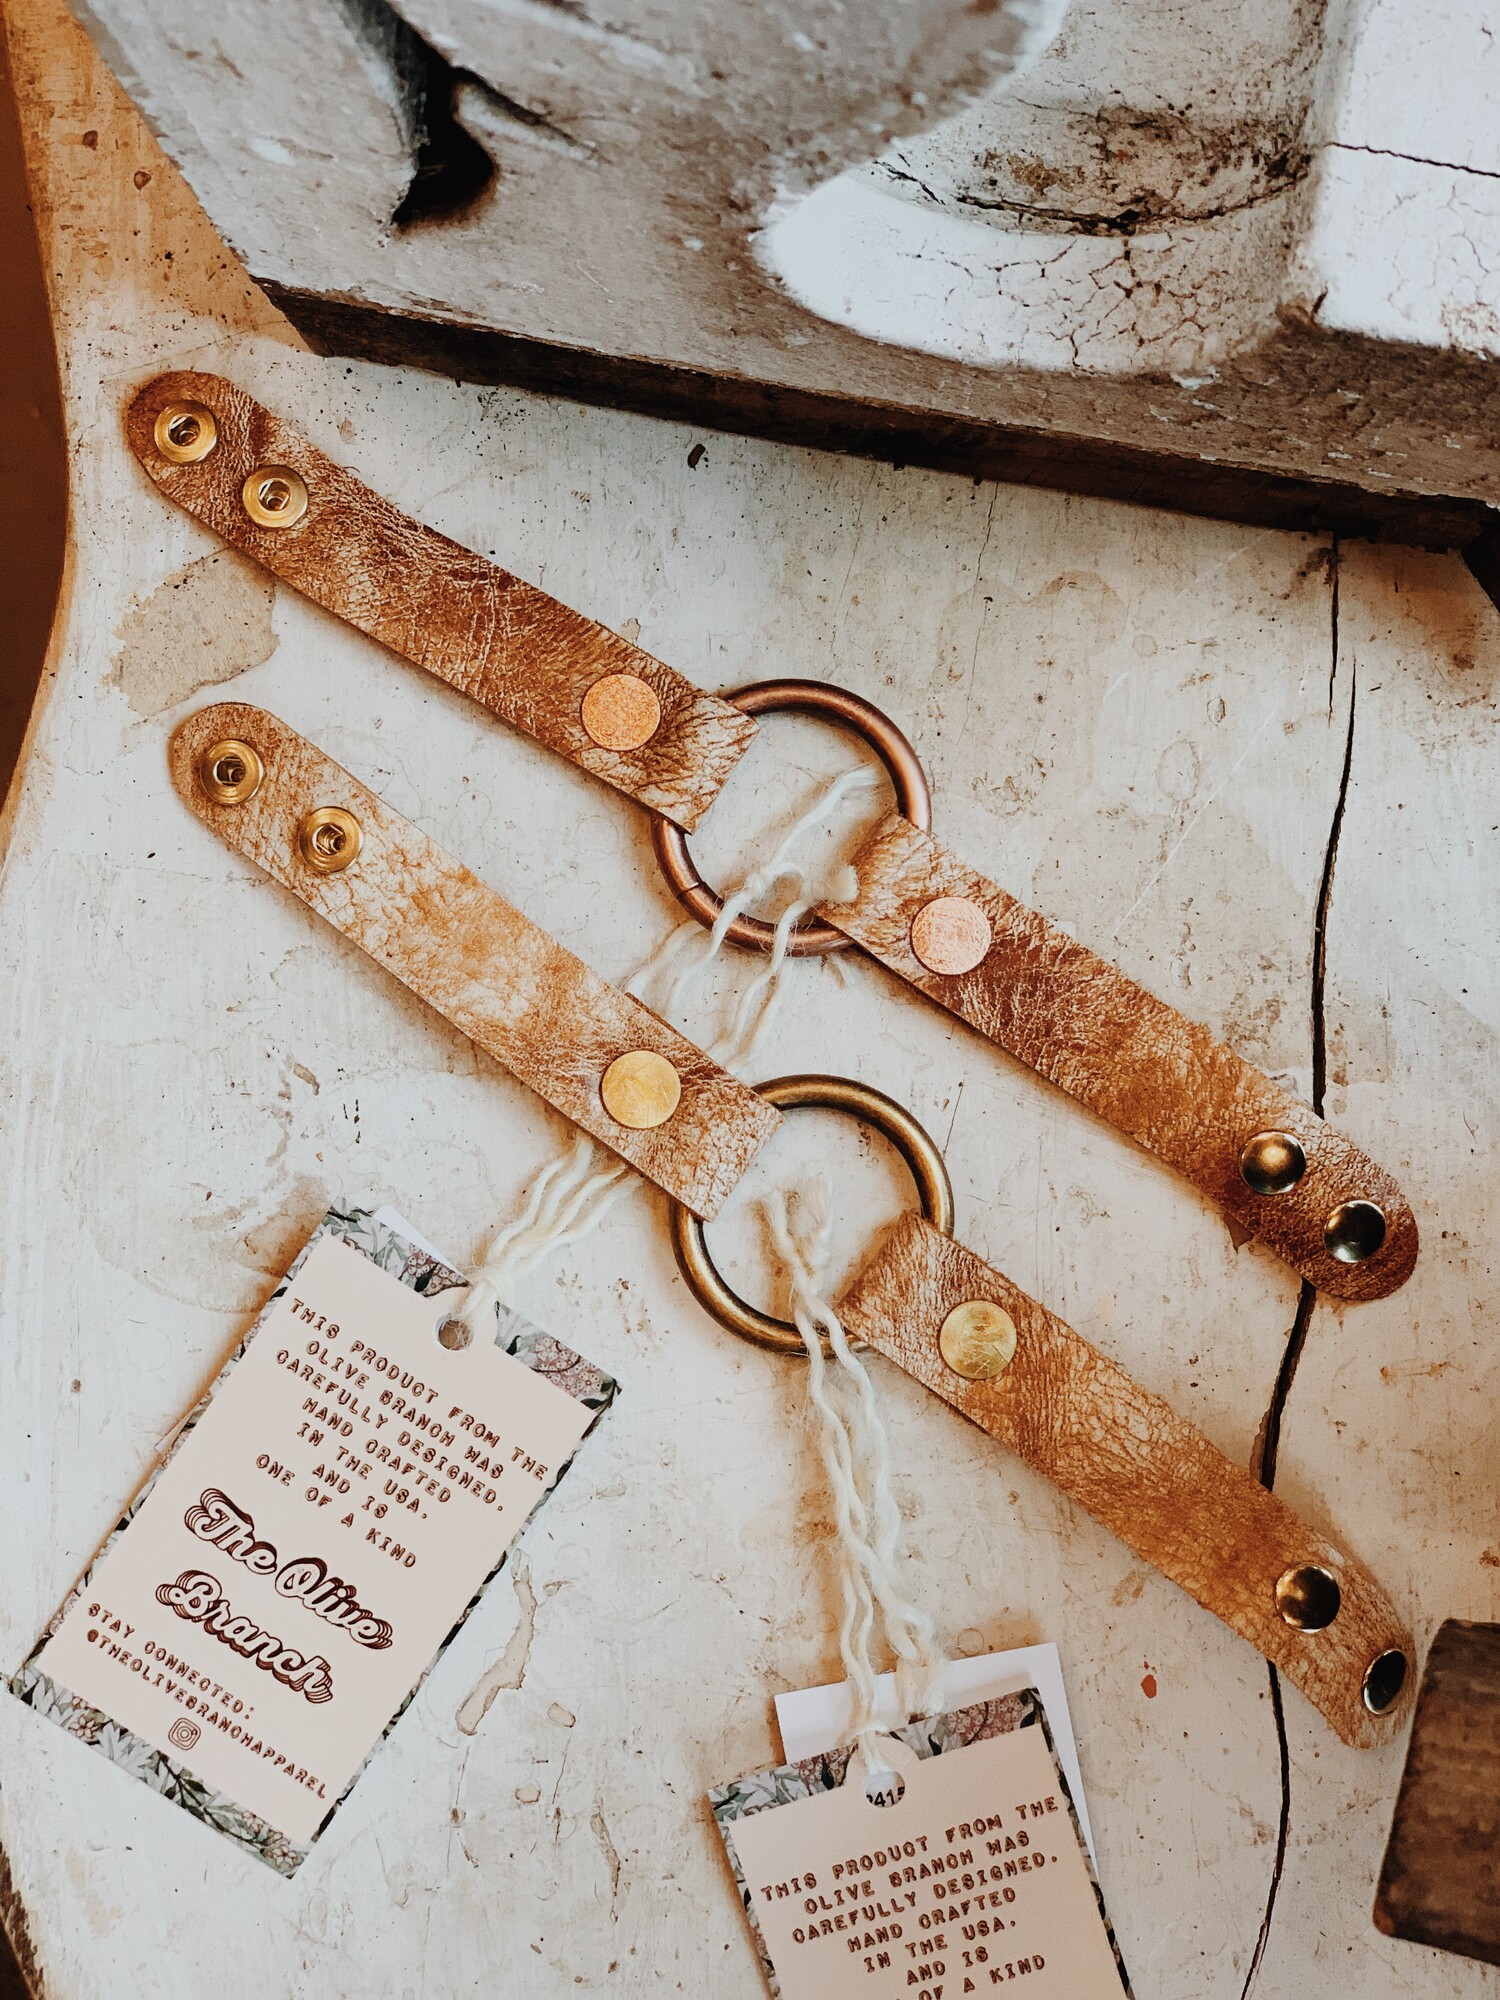 These handmade, genuine leather bracelets by The Olive Branch measure 9 inches in length, with two adjustable snaps. This artisan bracelet is available with copper hardware or brass hardware!